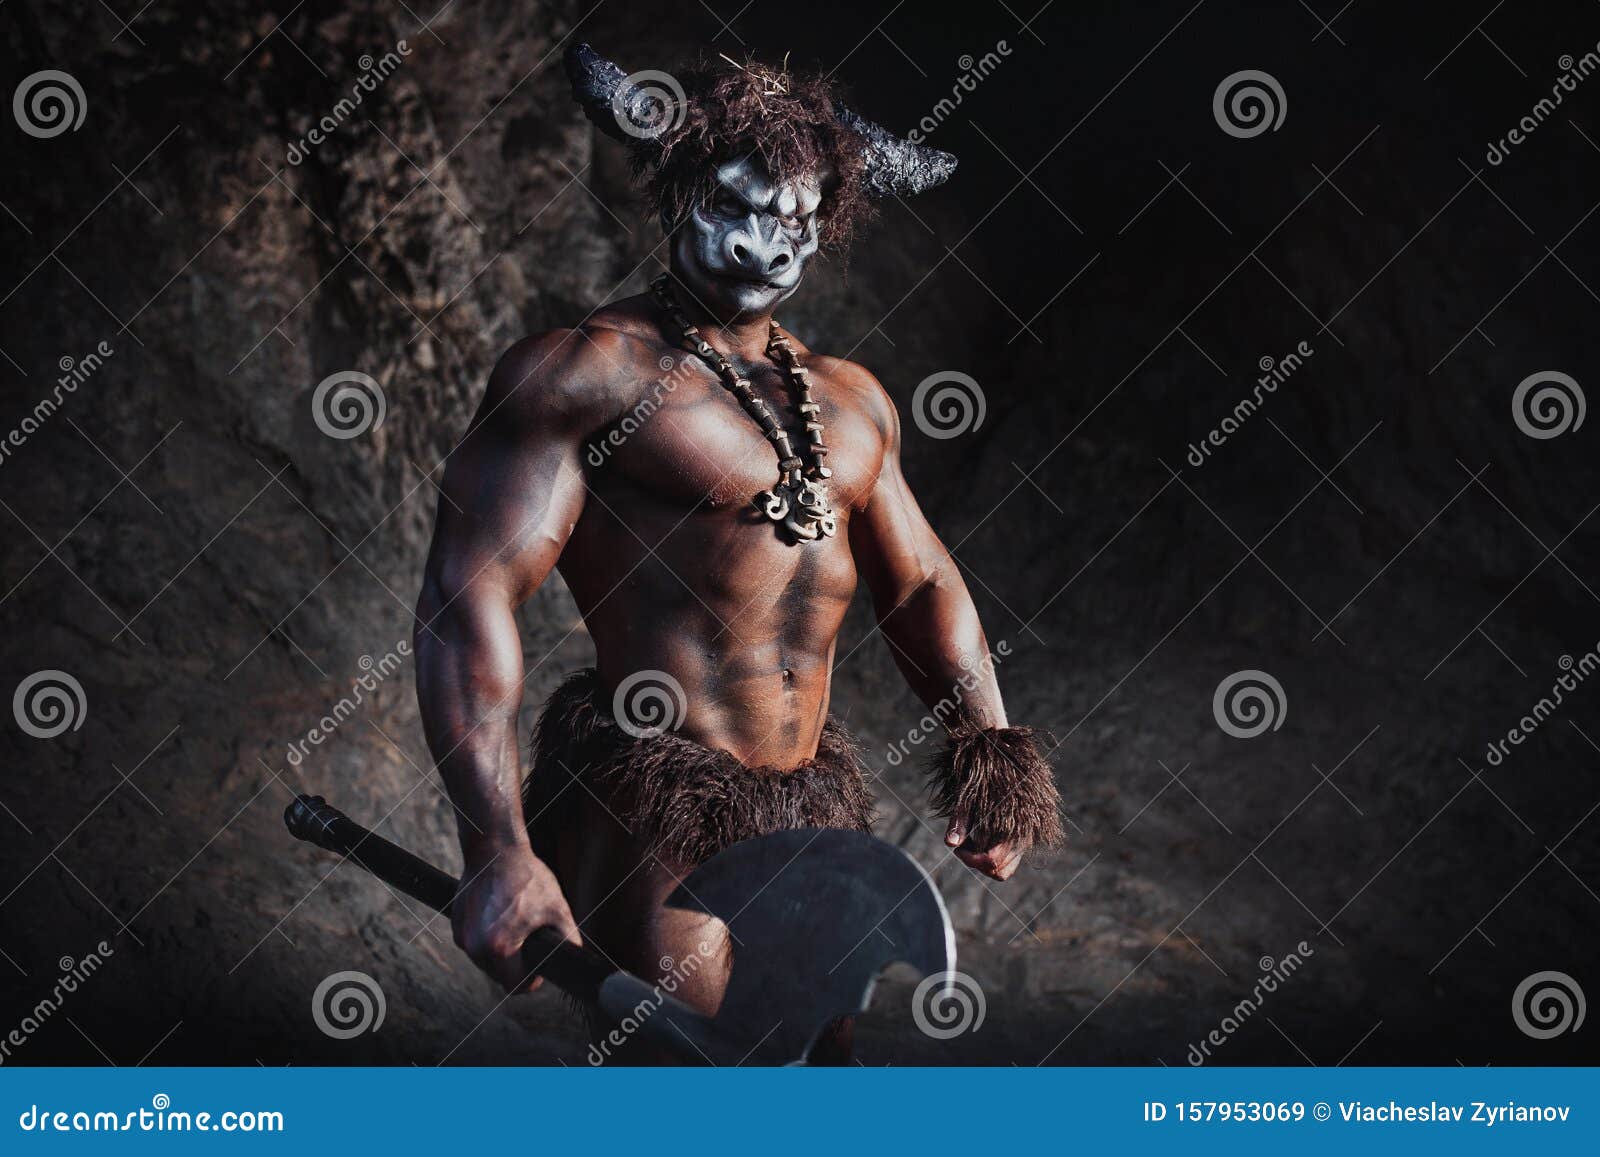 mythological minotaur  half bull half man stands in a rock cave in an aggressive stance